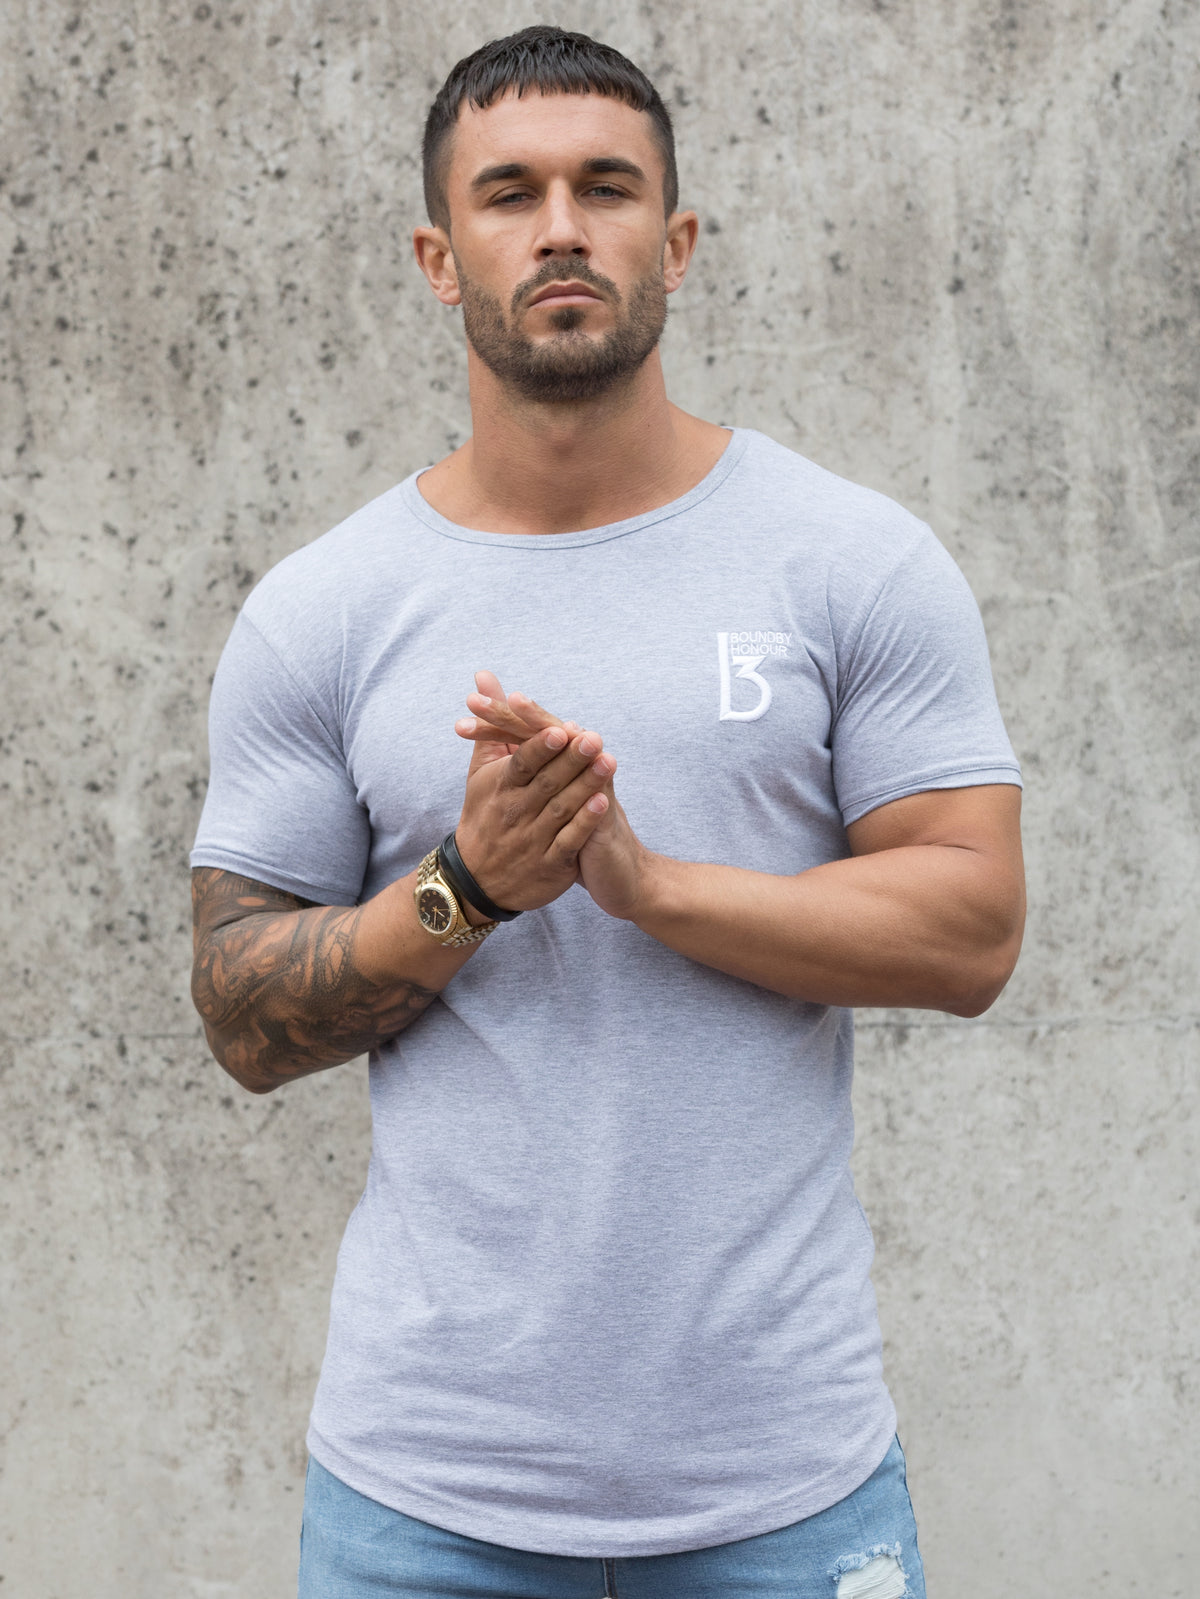 BST24 Clearance | BBH Men's Branded Short Sleeve Athletic T-shirt | Bound By Honour Bound By Honour RAWDENIM